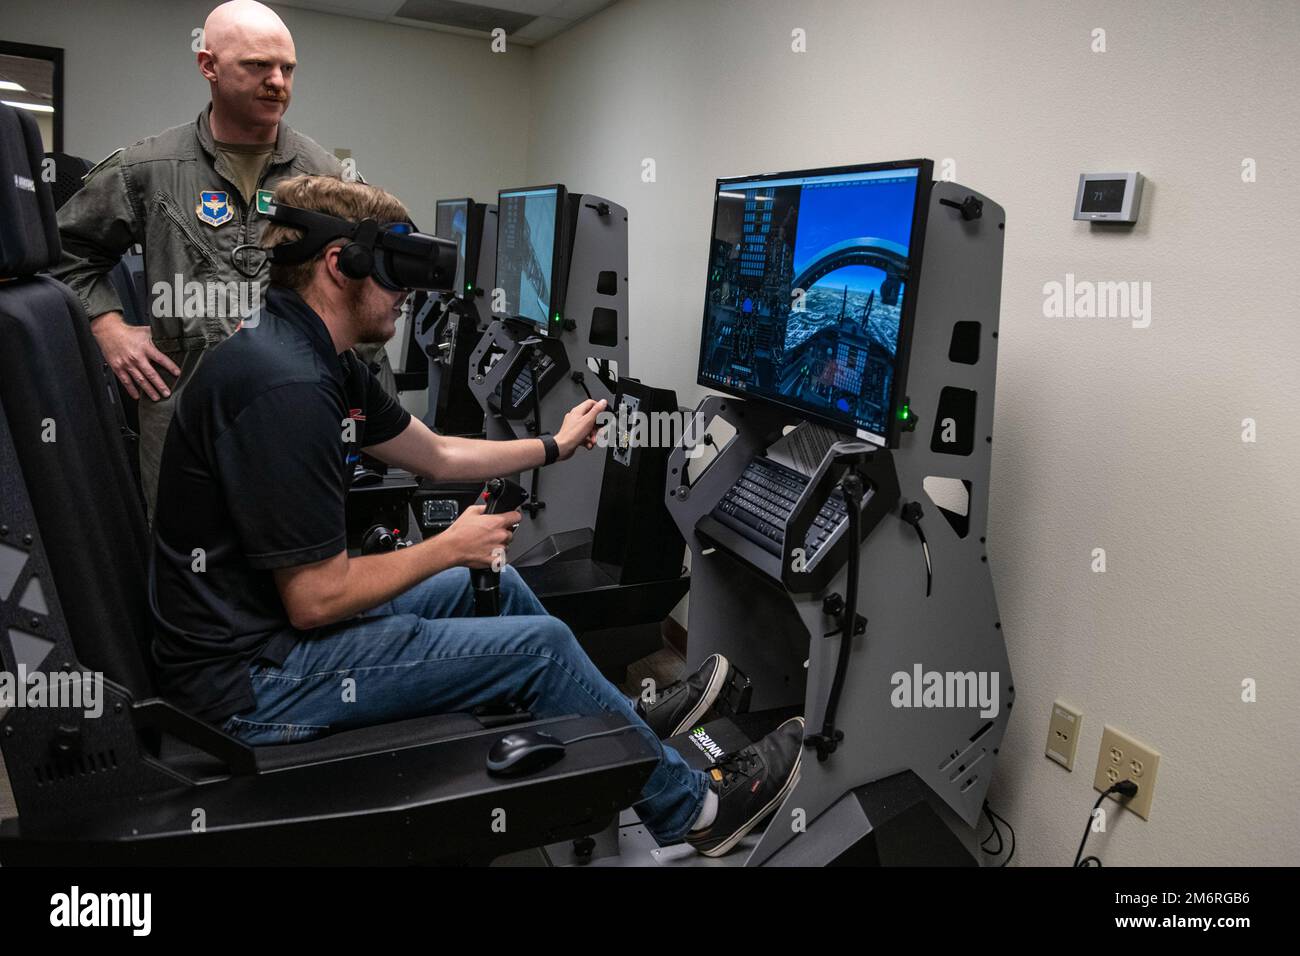 Garrett Smithley, driver for Rick Ware Racing’s NASCAR Cup Series, flys a T-38 Talon simulator at the 12th Flying Training WIng on Joint Base San Antonio-Randolph, Texas, May 4, 2022. Smithley, his racing crew and his show car toured JBSA over three days giving service members and their families an up-close look as part of their Military Salutes Program. Stock Photo